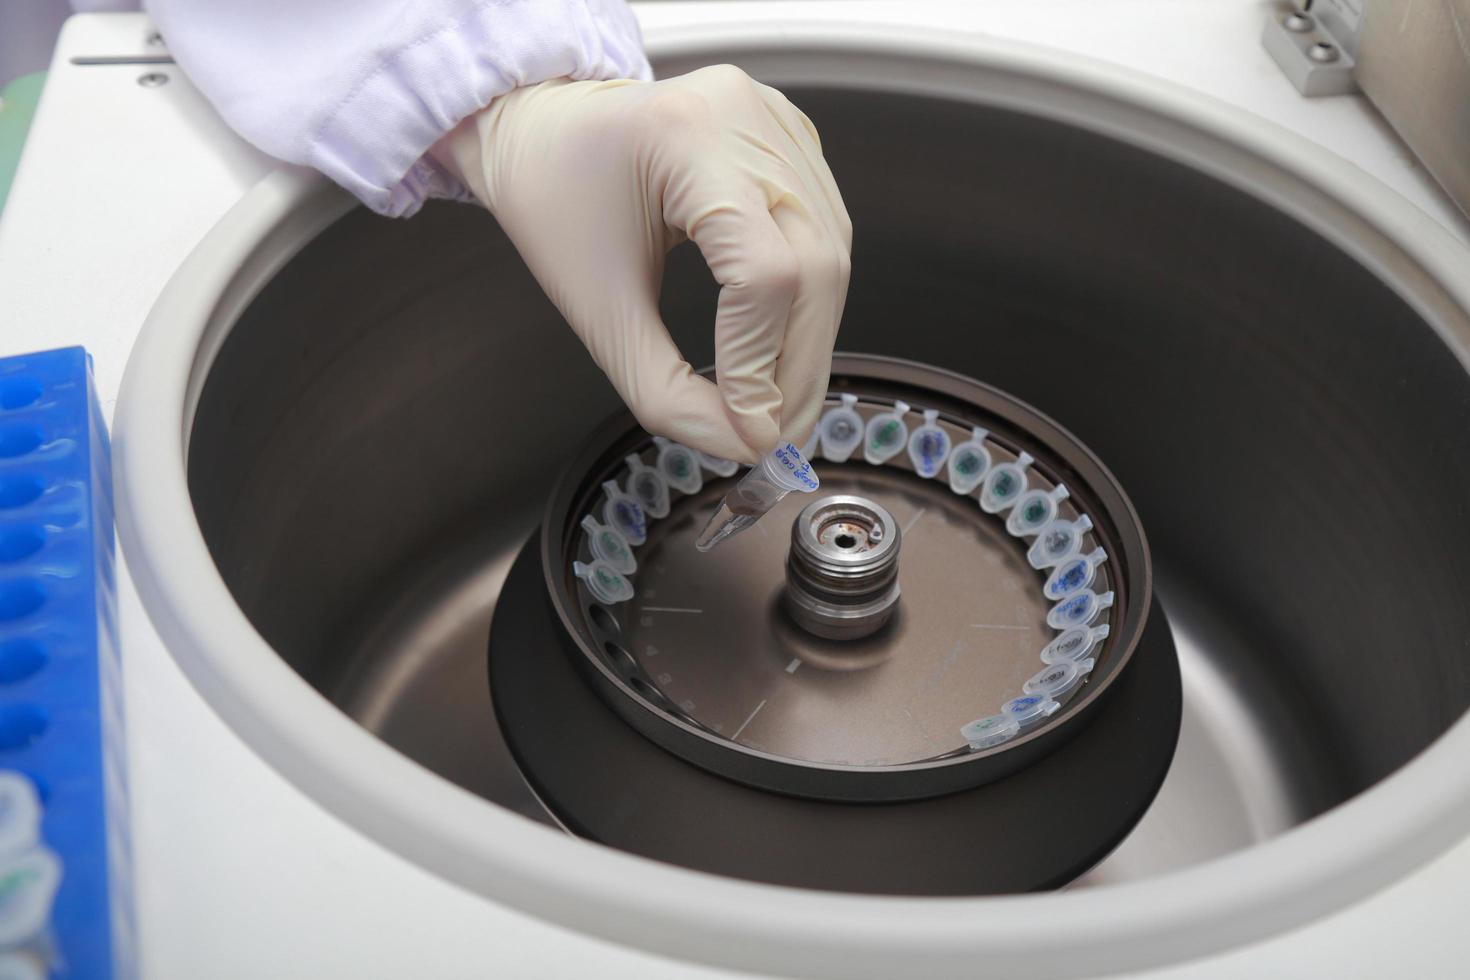 Scientist loading a sample to centrifuge photo